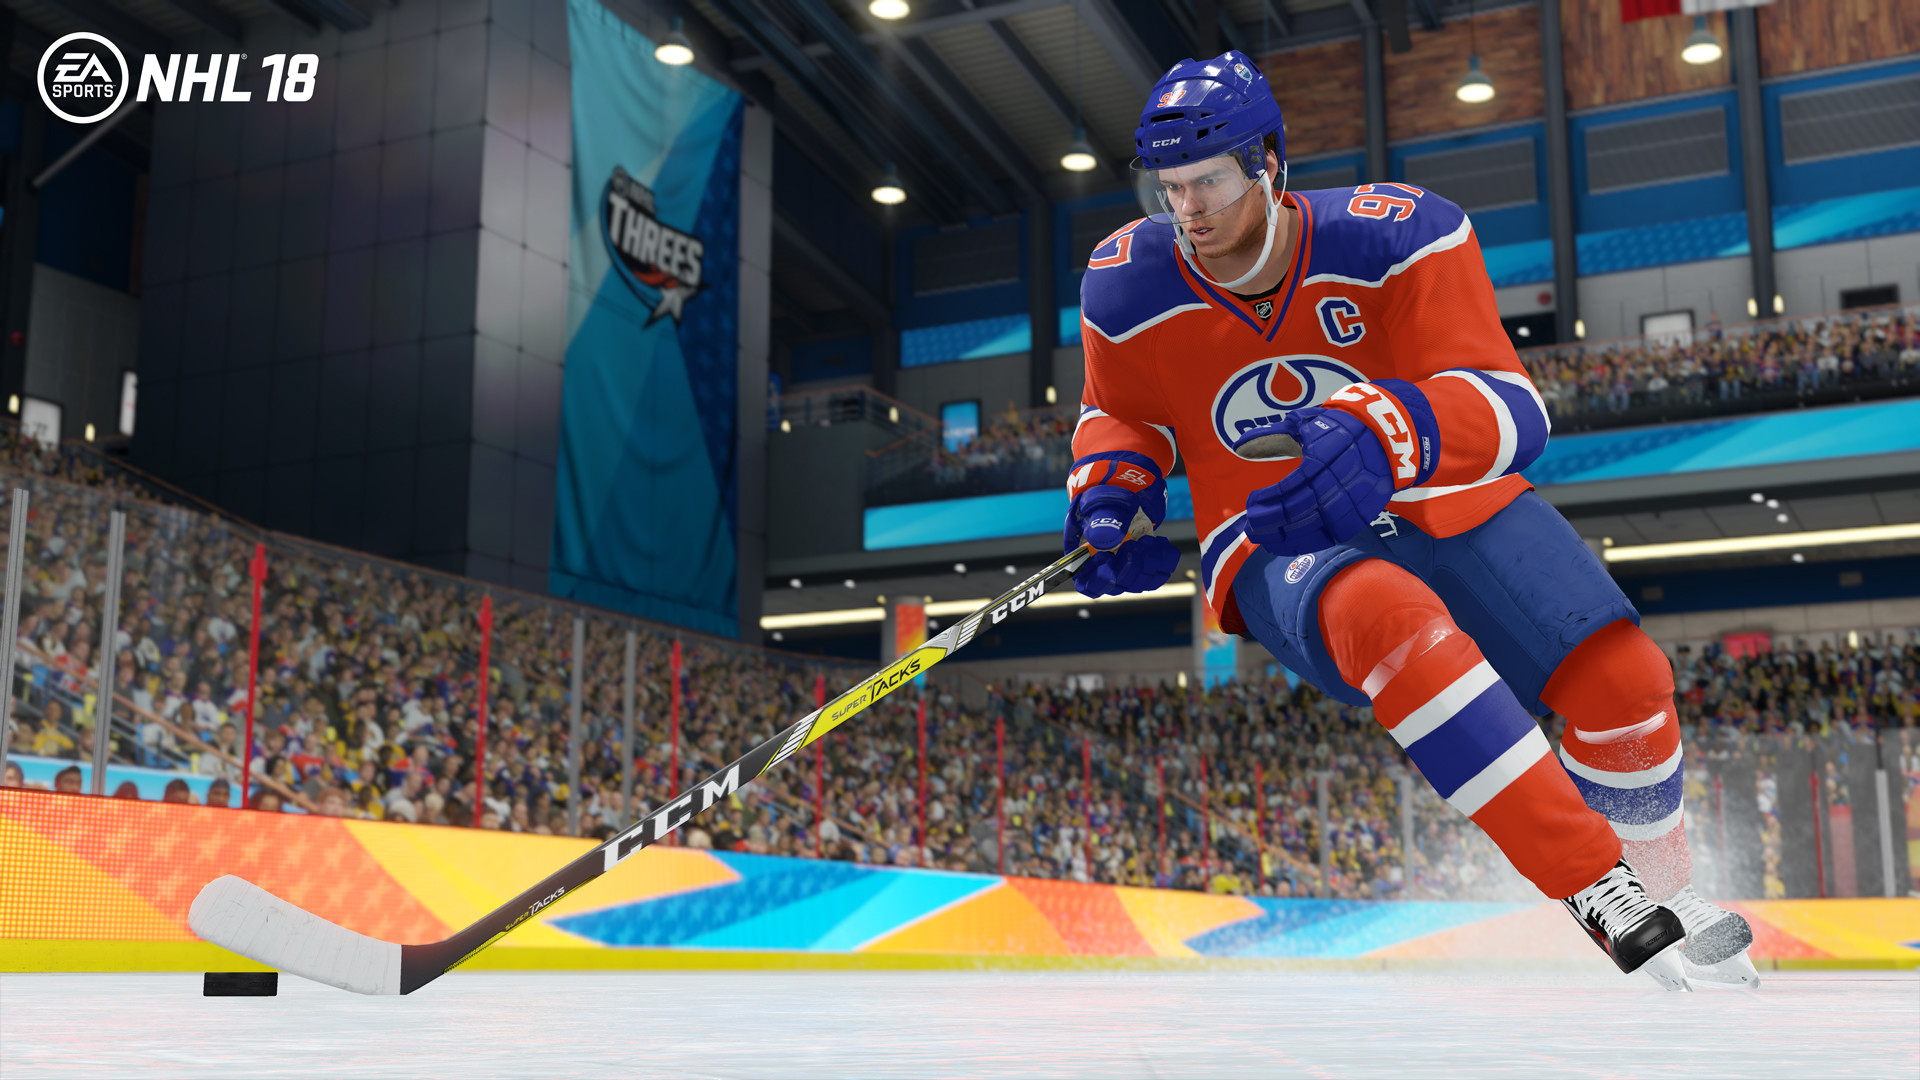 1920x1080 The NHL series has had two great entries in a row and NHL 18 is shaping up  to continue the trend. The gameplay additions make the action more dynamic  and ...